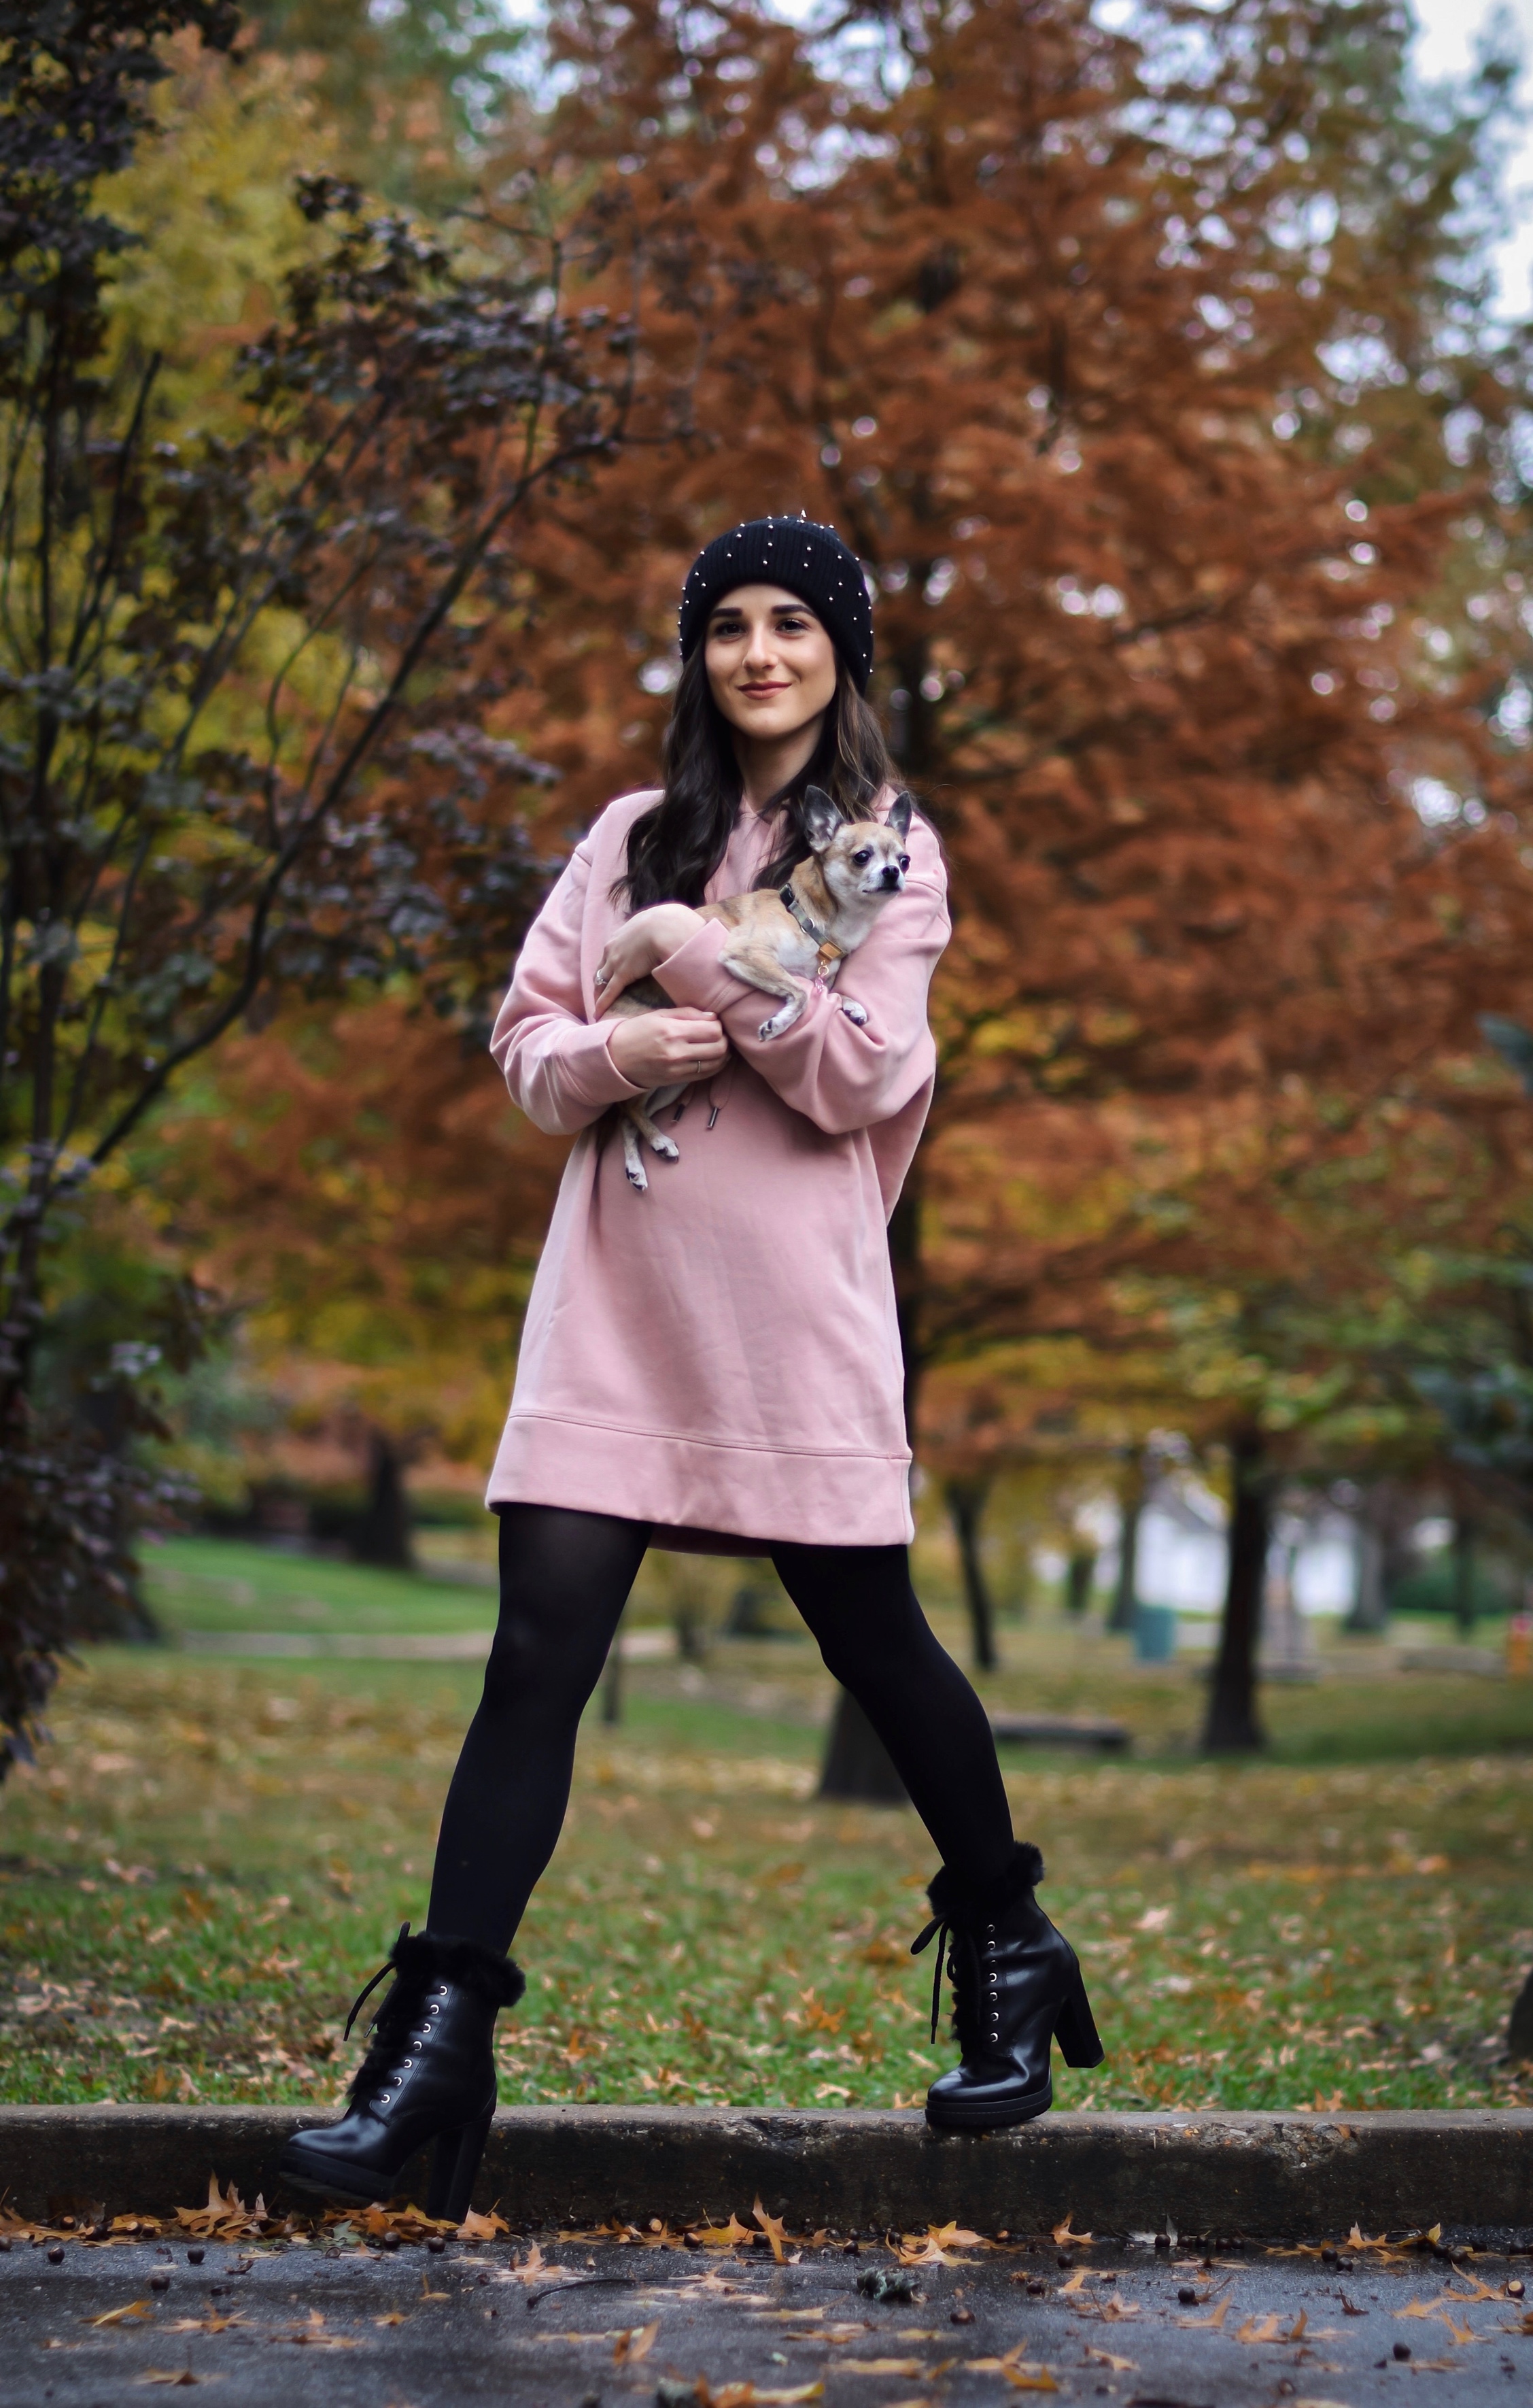 Getting Winter Ready With Macy's Esther Santer Fashion Blog NYC Street Style Blogger Outfit OOTD Trendy Chihuahua Pink Sweatshirt Dress Black Beanie Black Fur Booties Boots Shoes Fall Winter Outfit Tights Beautiful H&M Shop Cute Puppy Dog Inspiration.jpg